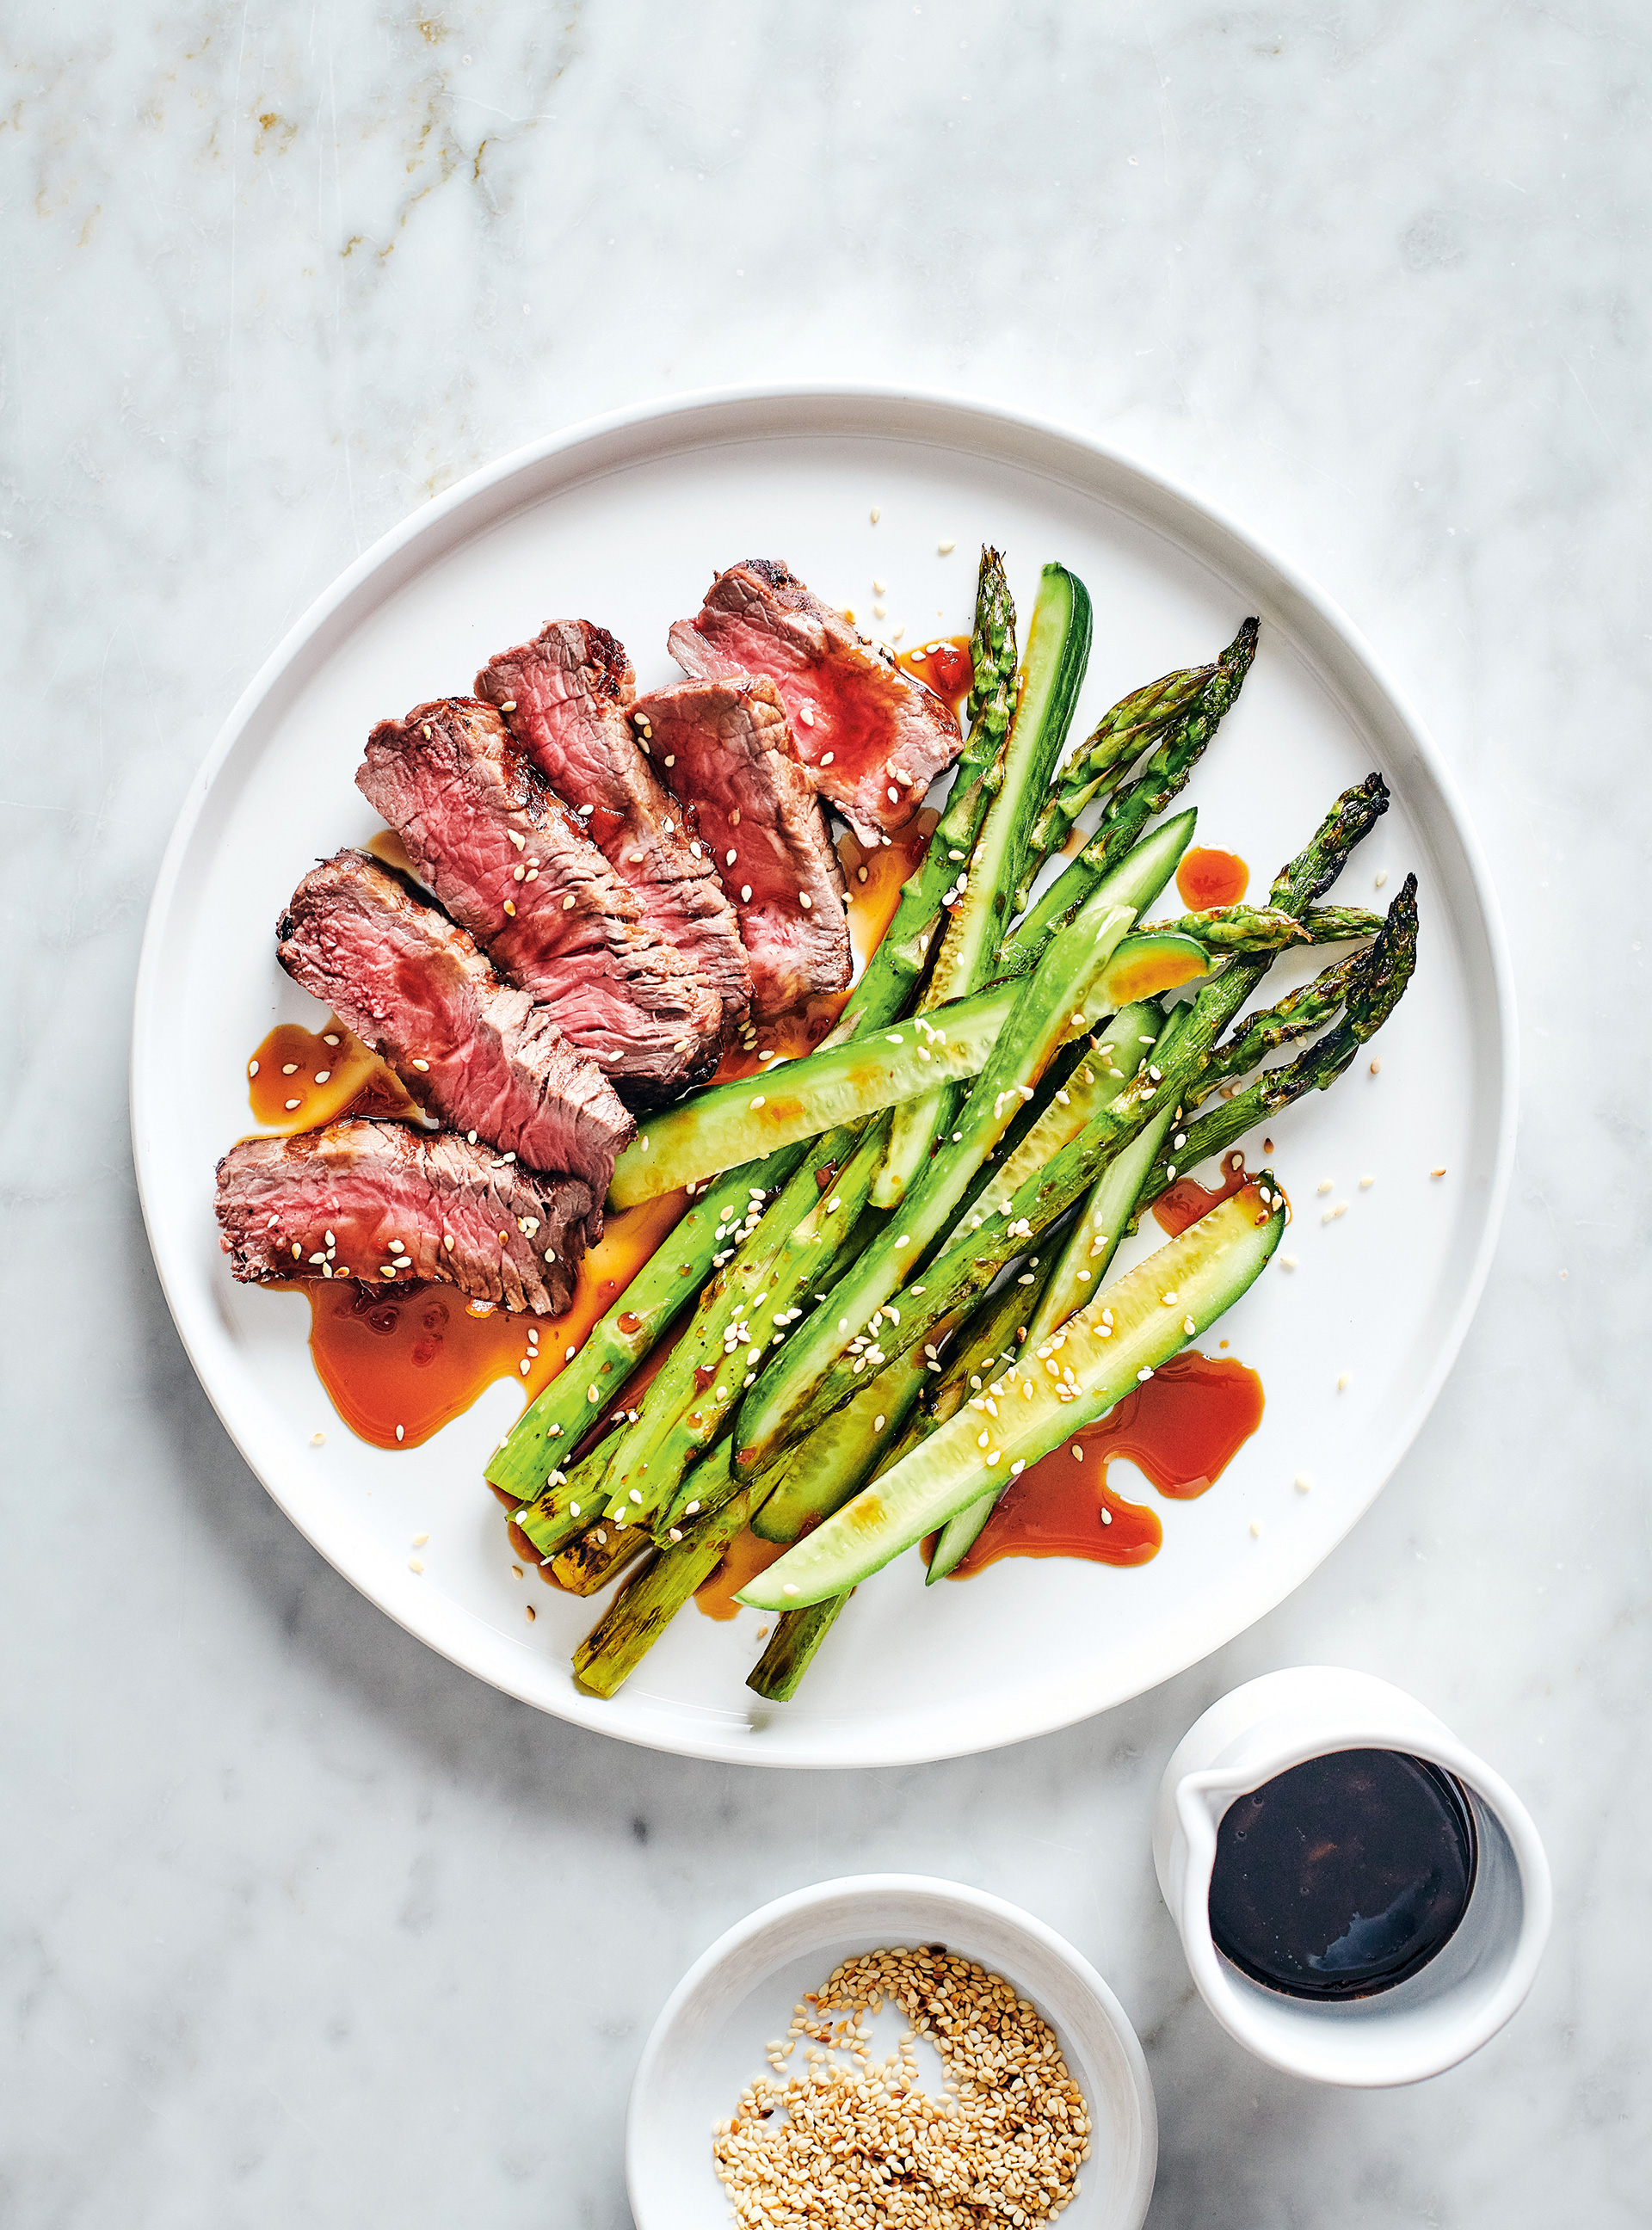 Steaks with Grilled Asparagus and Tamari Dressing